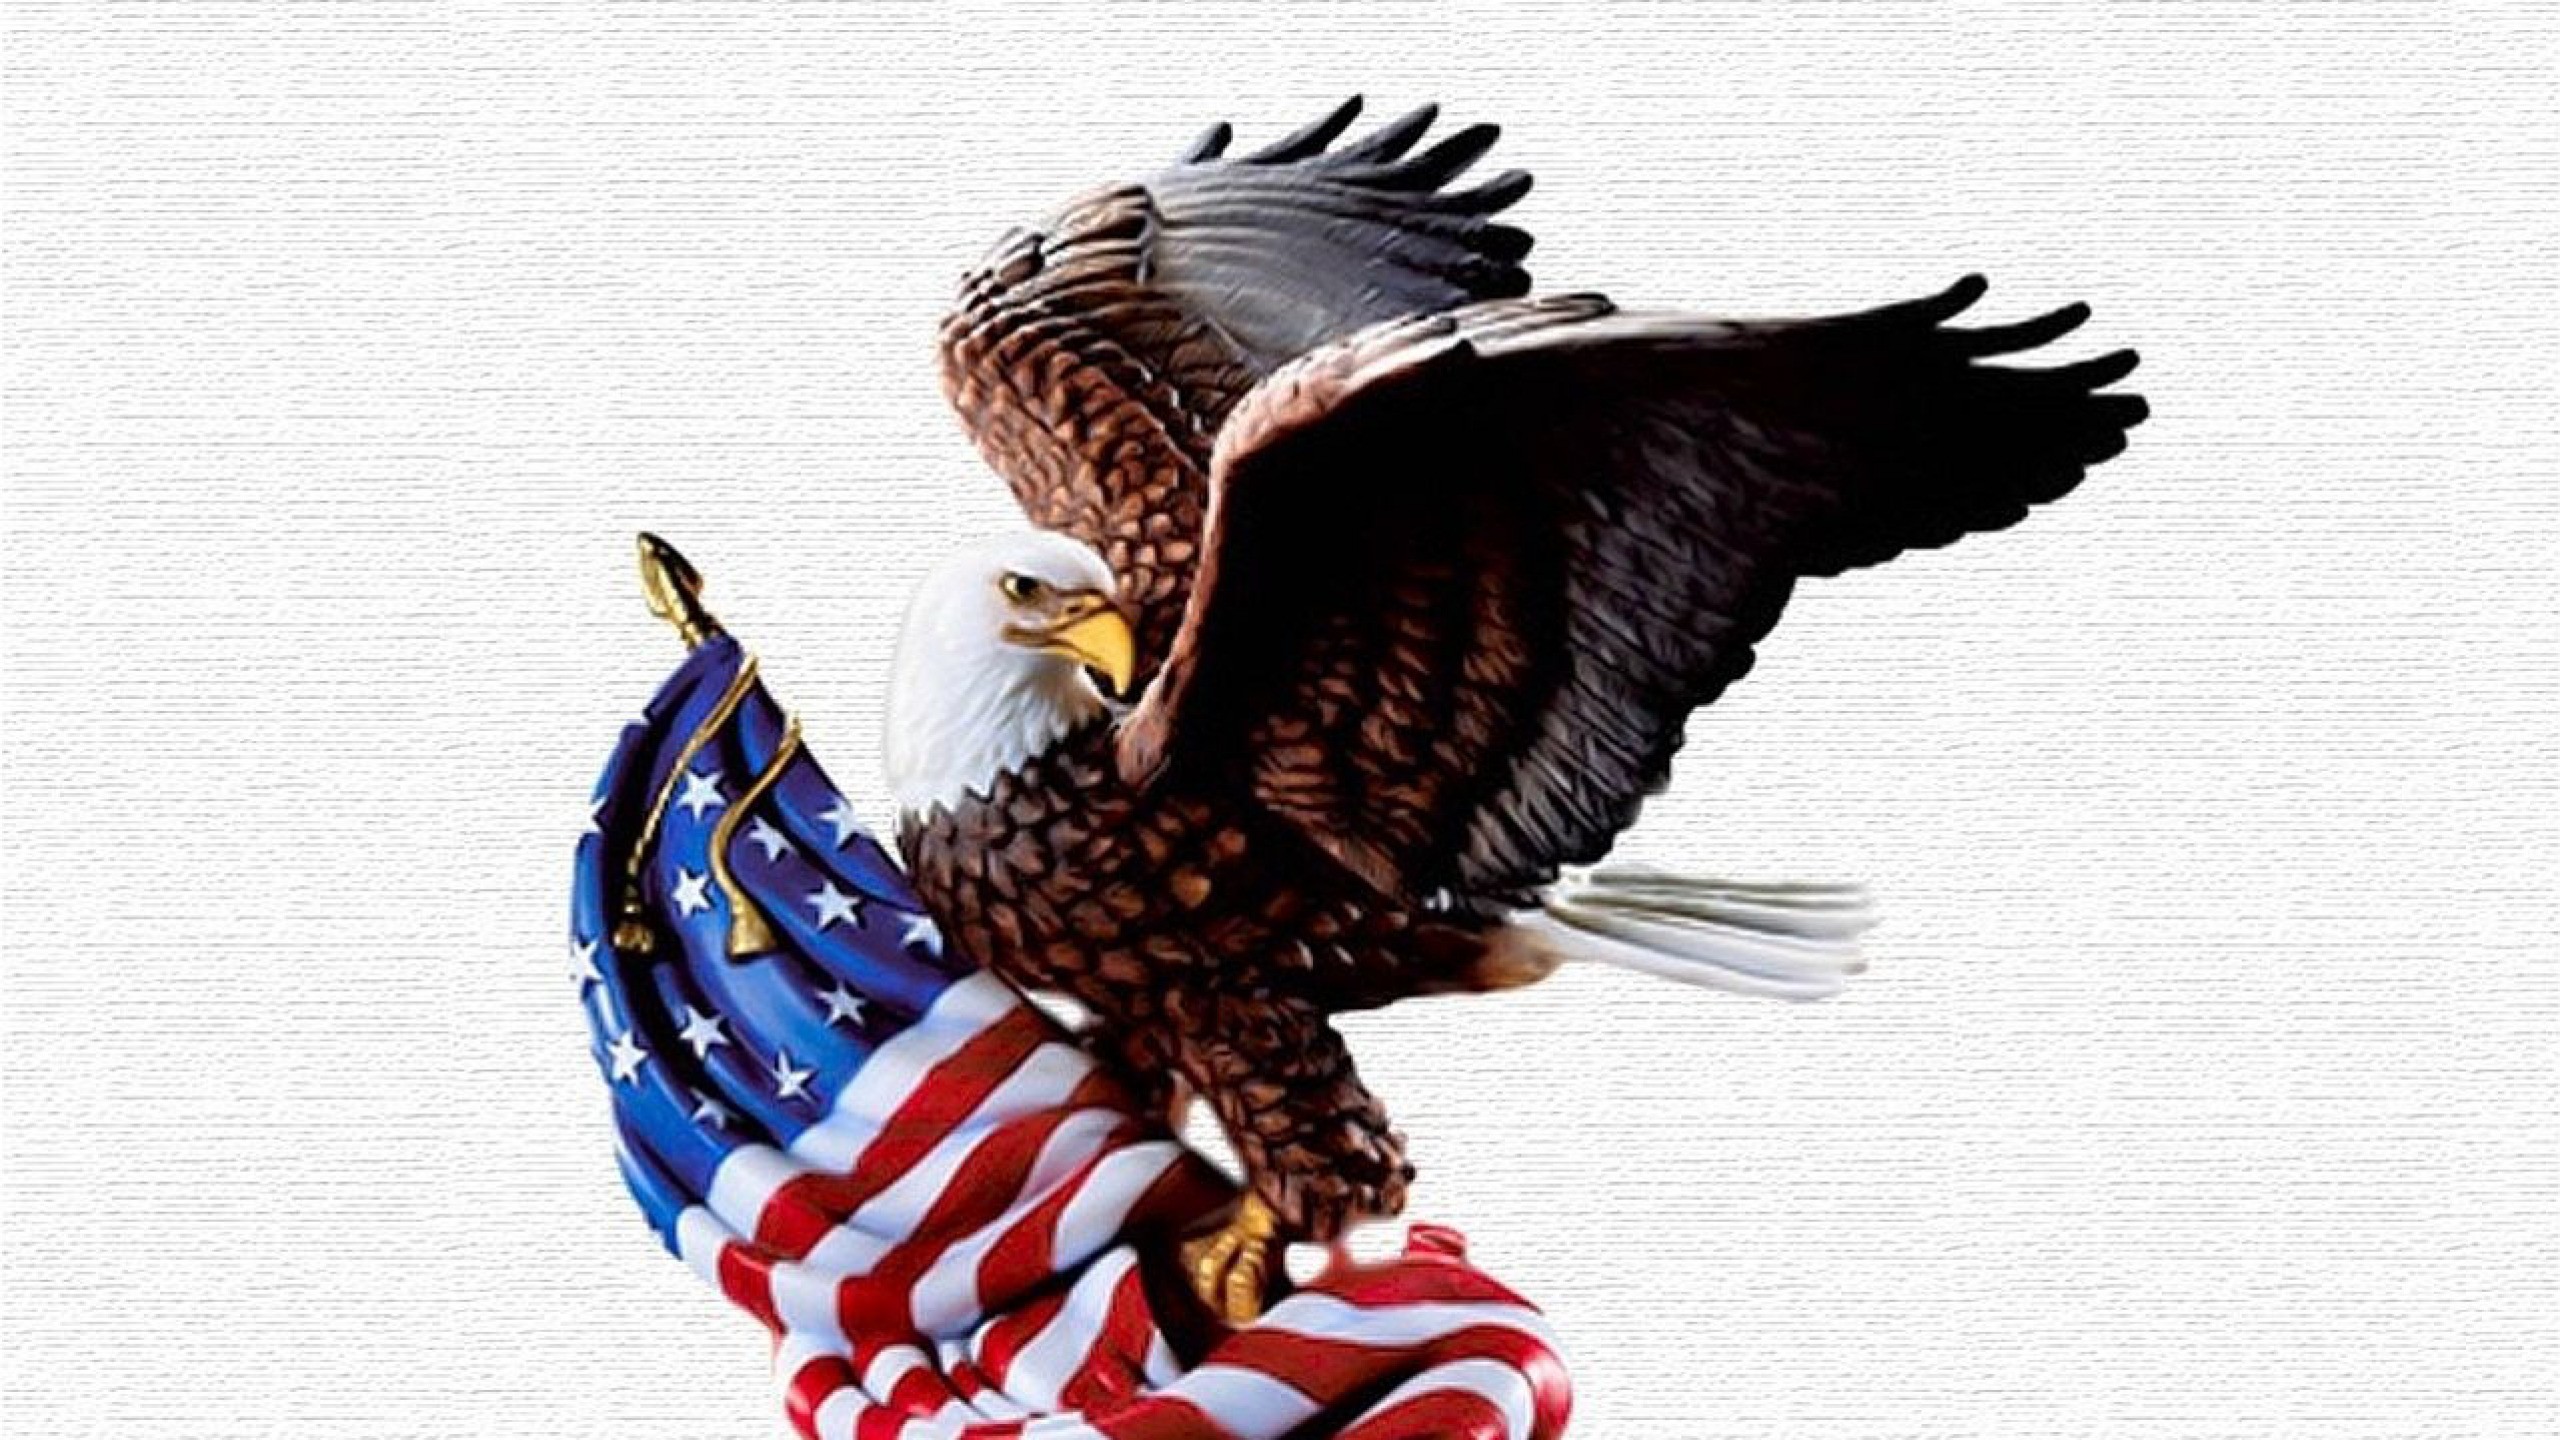 2560x1440 0 American Flag with Eagle Wallpaper Animal Wallpaper Page 15 American  Eagle .